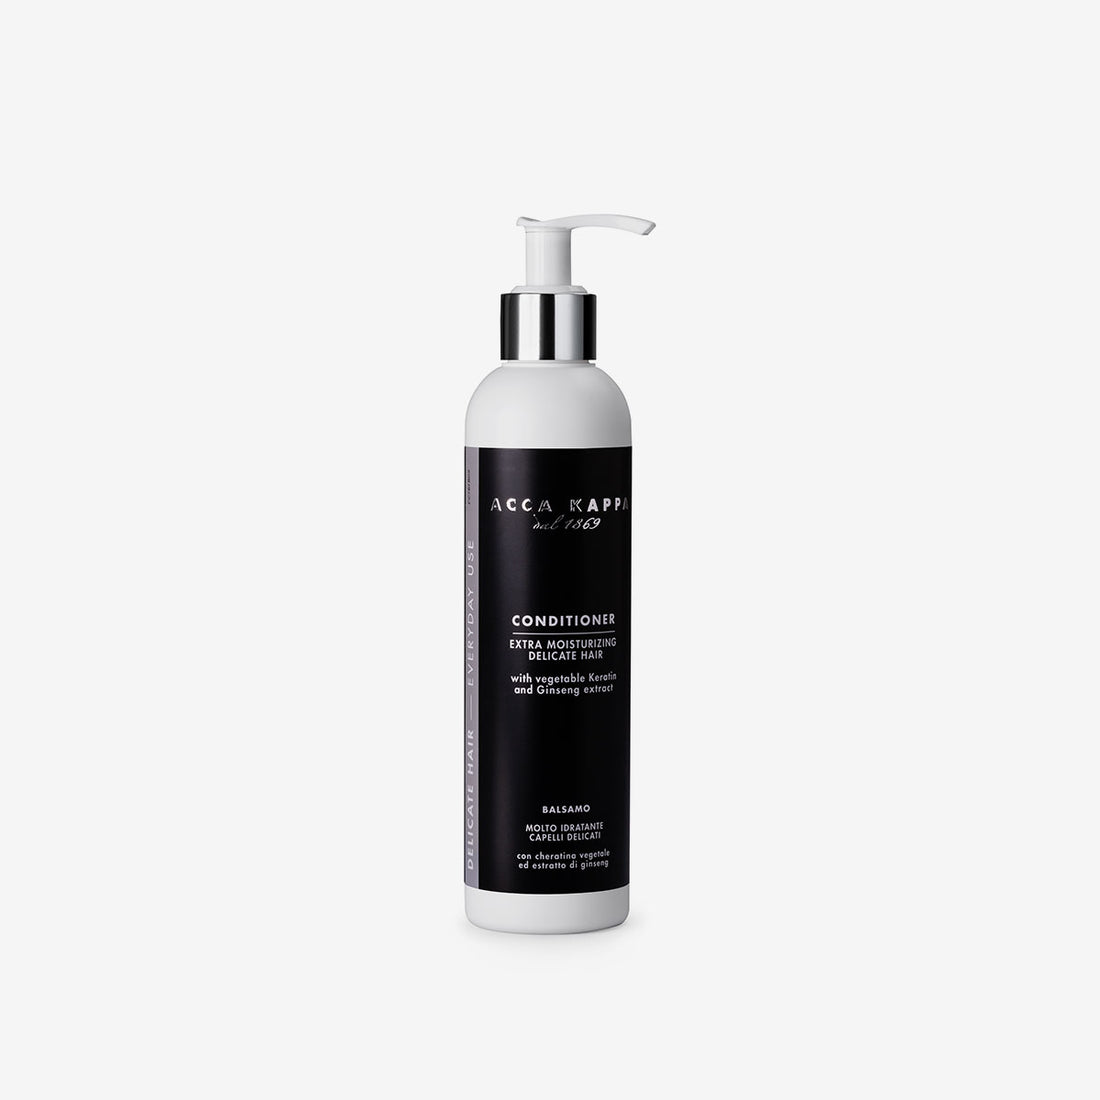 ACCA KAPPA White Moss Conditioner for Delicate Hair